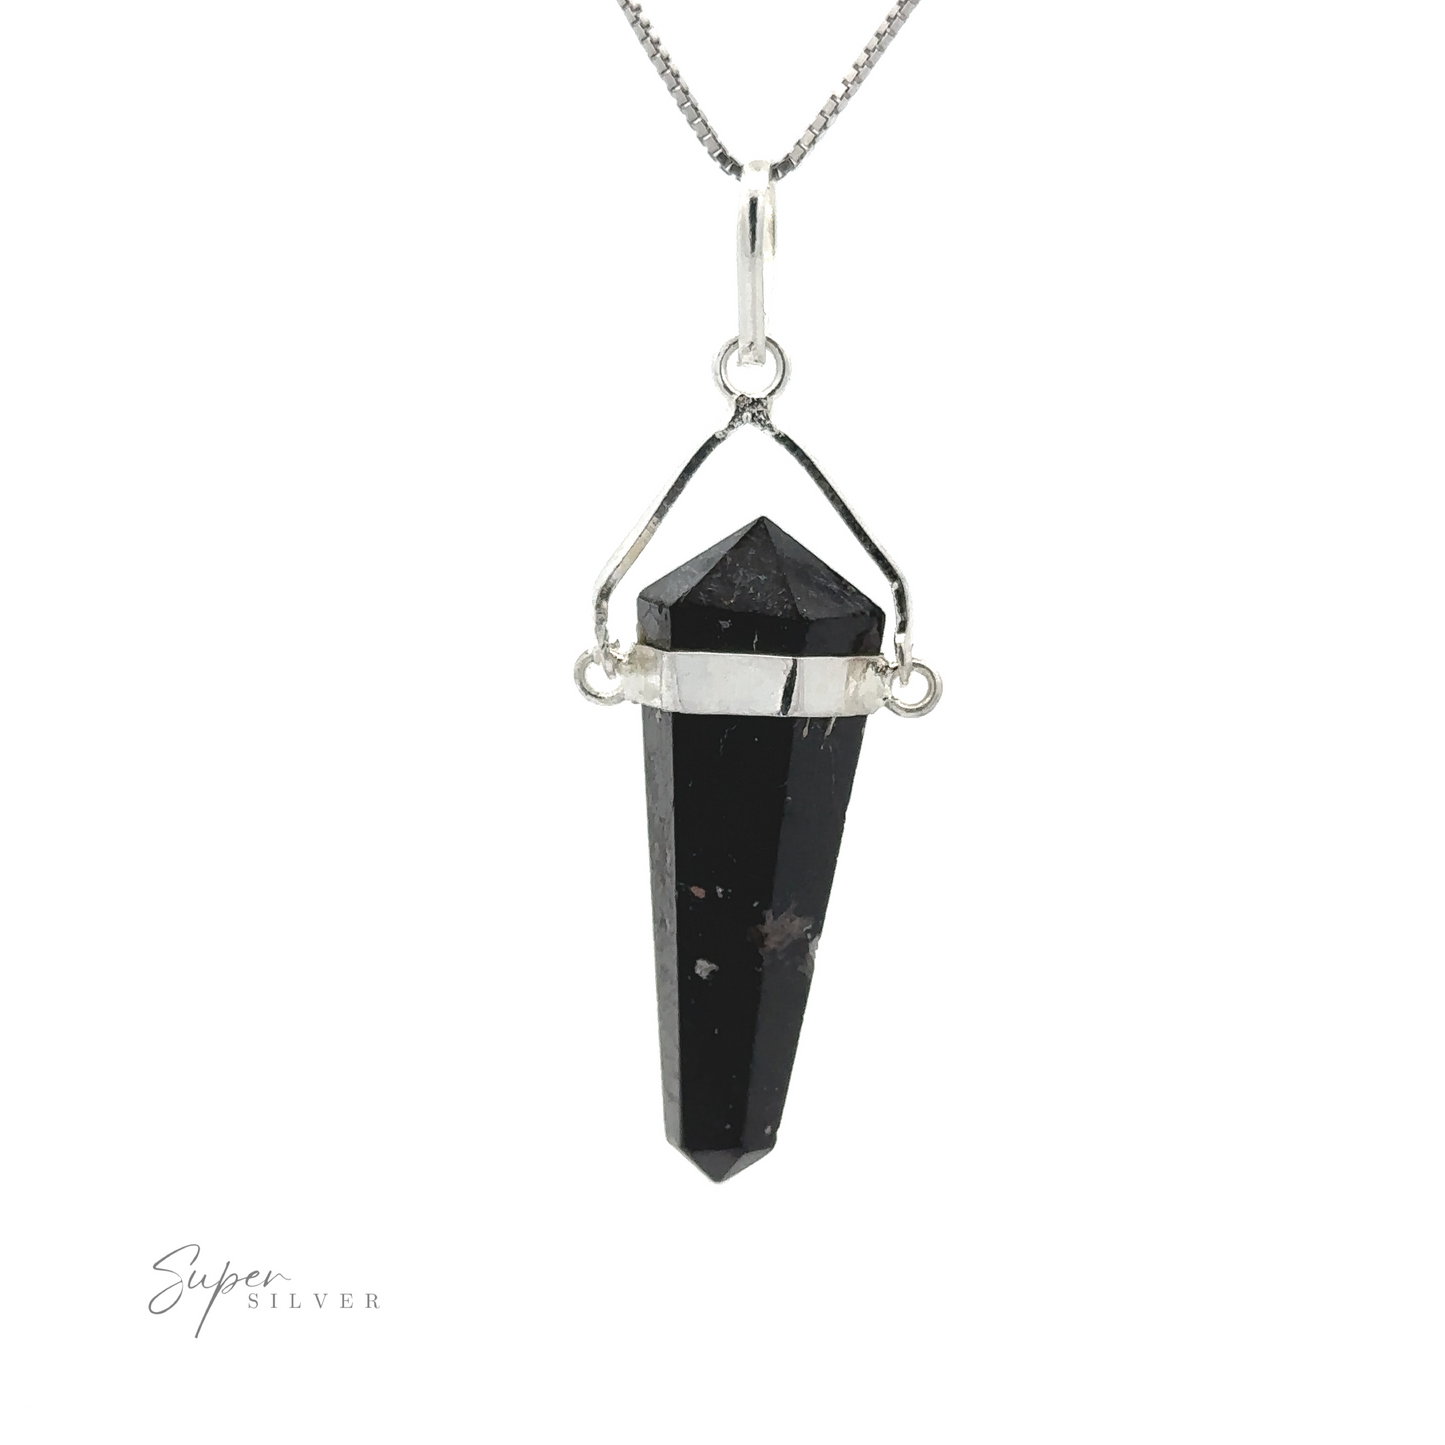 
                  
                    A Raw Stone Swivel Pendant encased in a silver-plated setting hangs from a silver chain. The logo "Super Silver" is visible in the bottom left corner.
                  
                